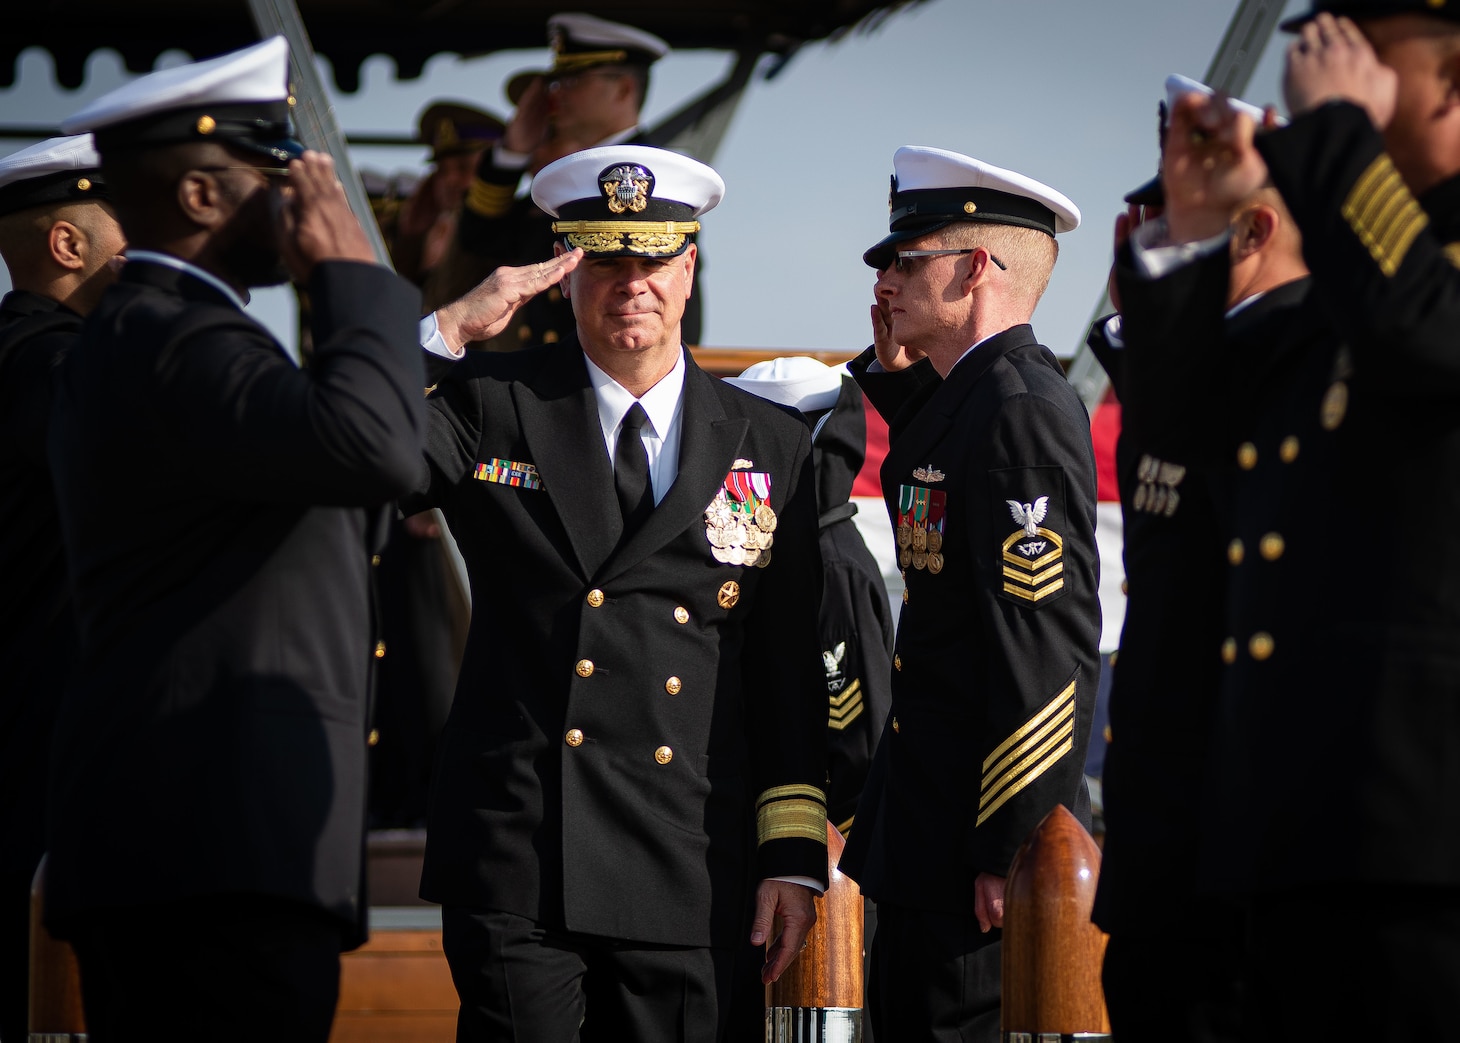 Rear Adm. Brendan McLane, Commander Naval Surface Force Atlantic, renders a hand salute to sideboys during a U.S. Aegis Ashore Missile Defense System Romania (USAAMDSRO) change of command ceremony on Naval Support Facility (NSF) Deveselu, Romania, Oct. 14, 2022.